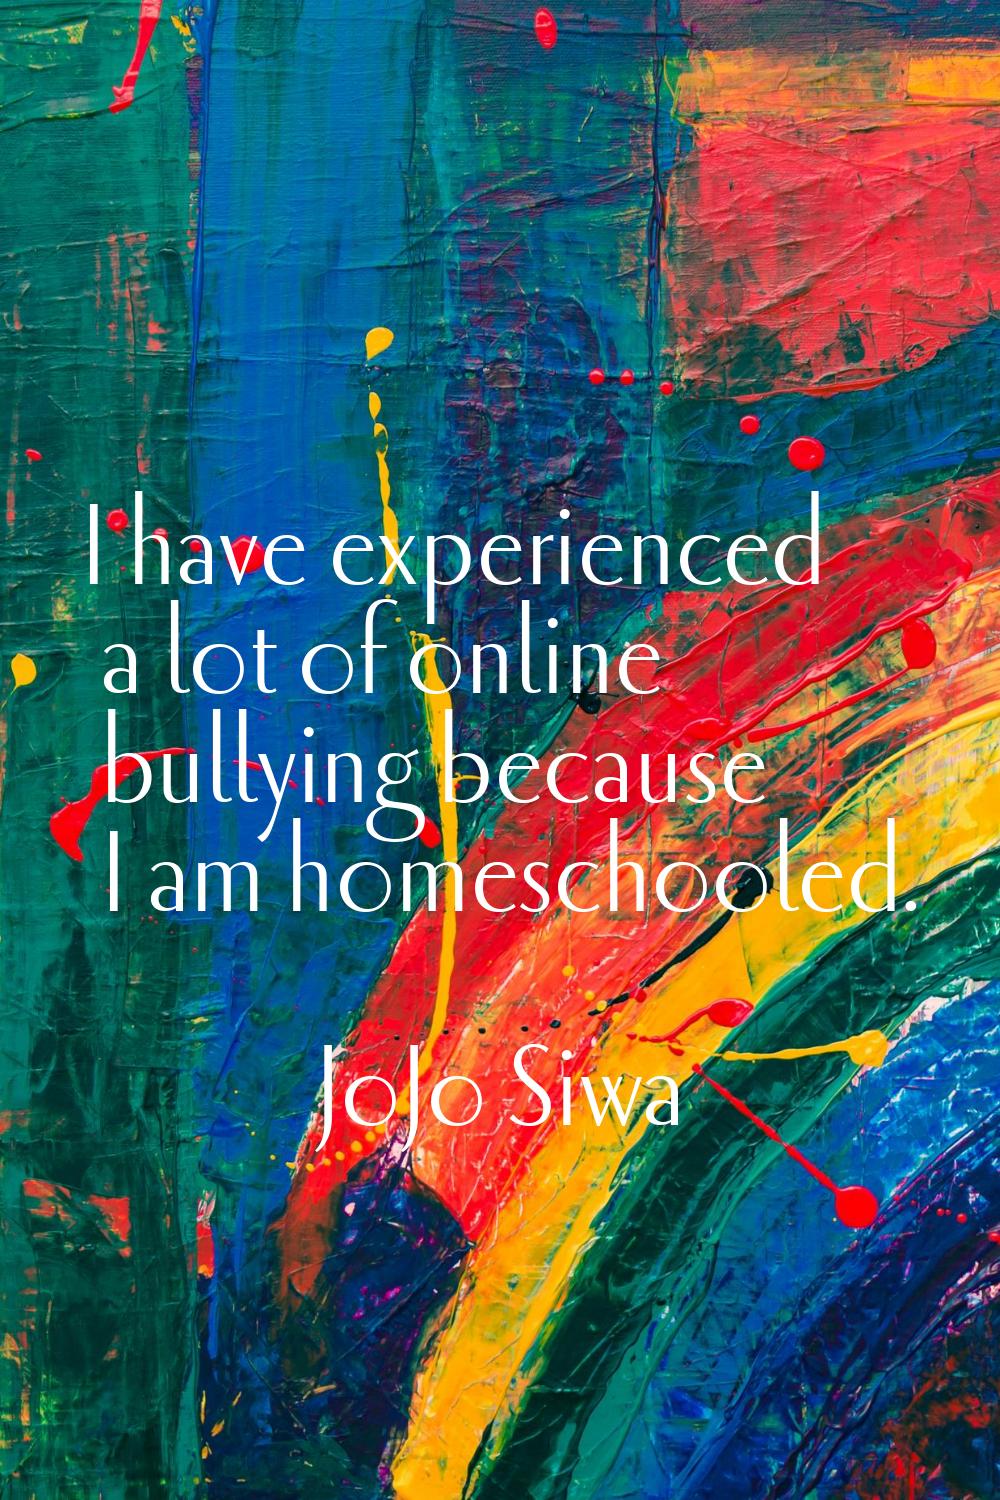 I have experienced a lot of online bullying because I am homeschooled.